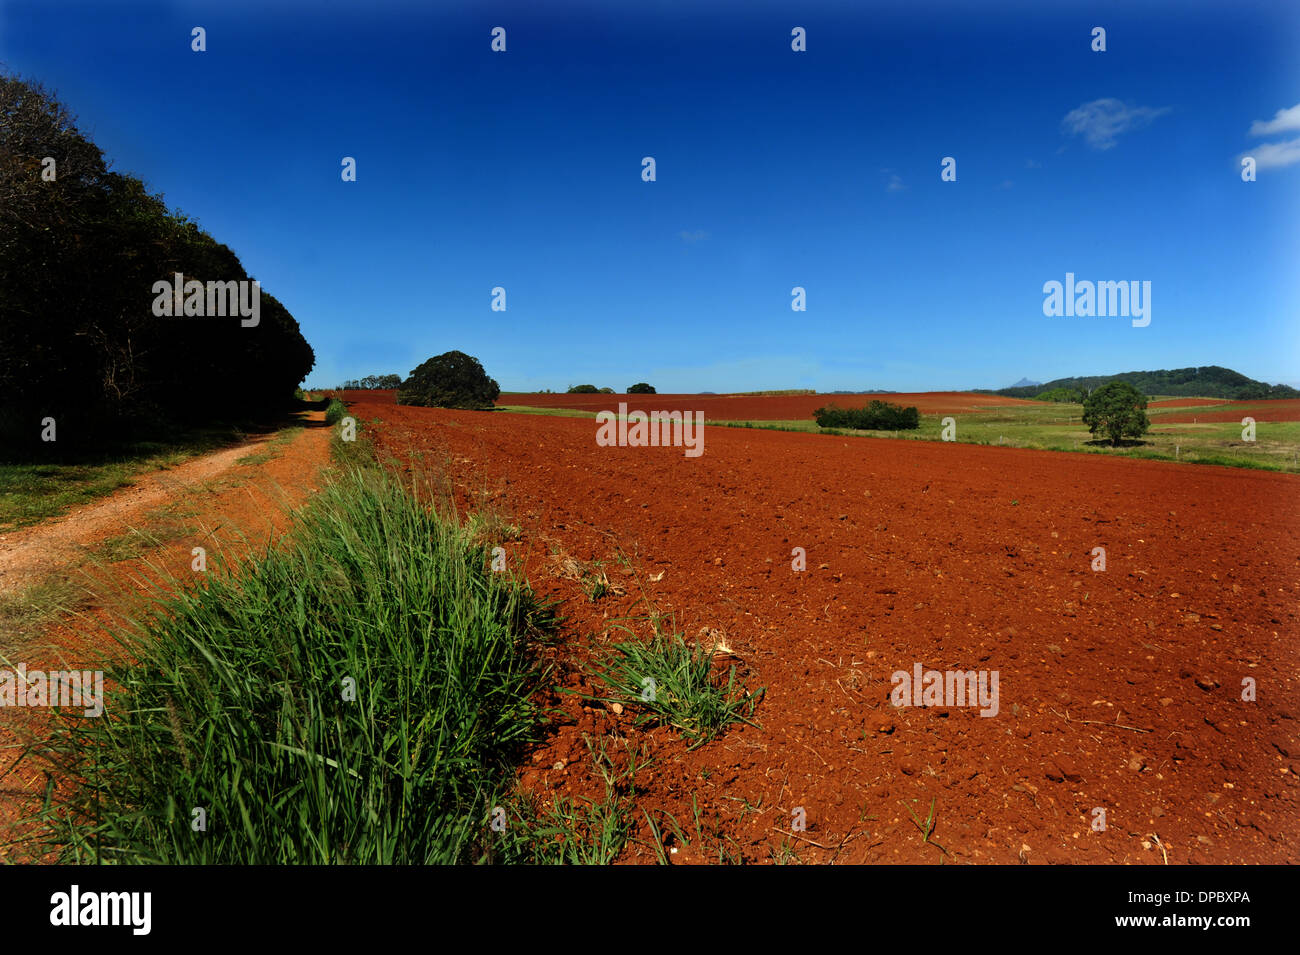 Red Volcanic soil near Duranbah in Northern NSW Australia Stock Photo